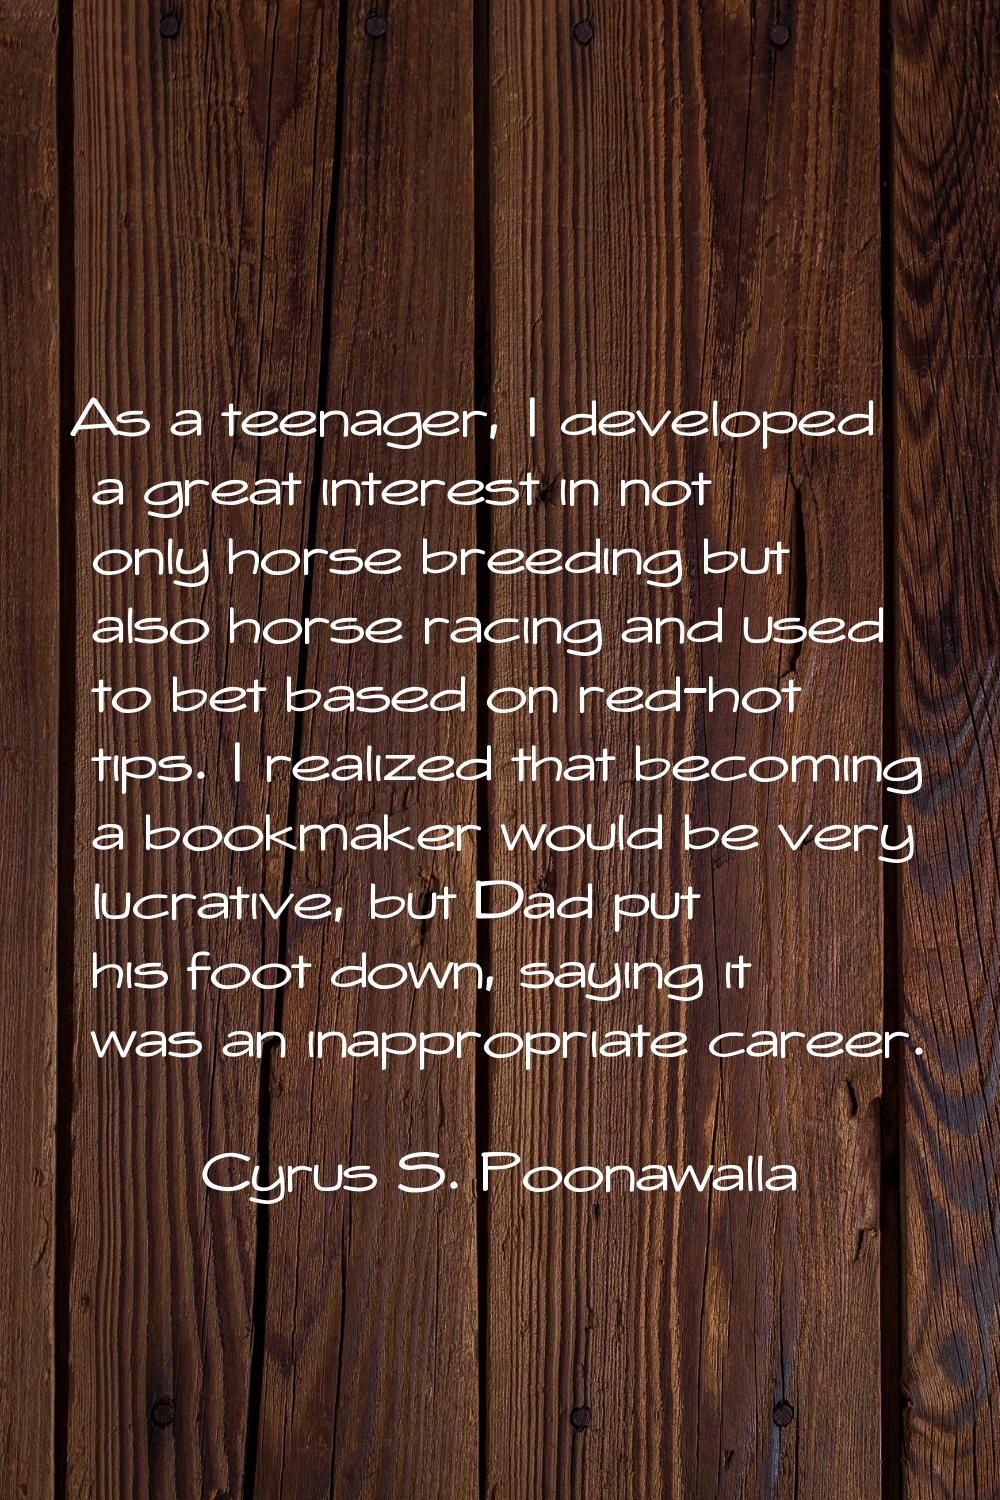 As a teenager, I developed a great interest in not only horse breeding but also horse racing and us